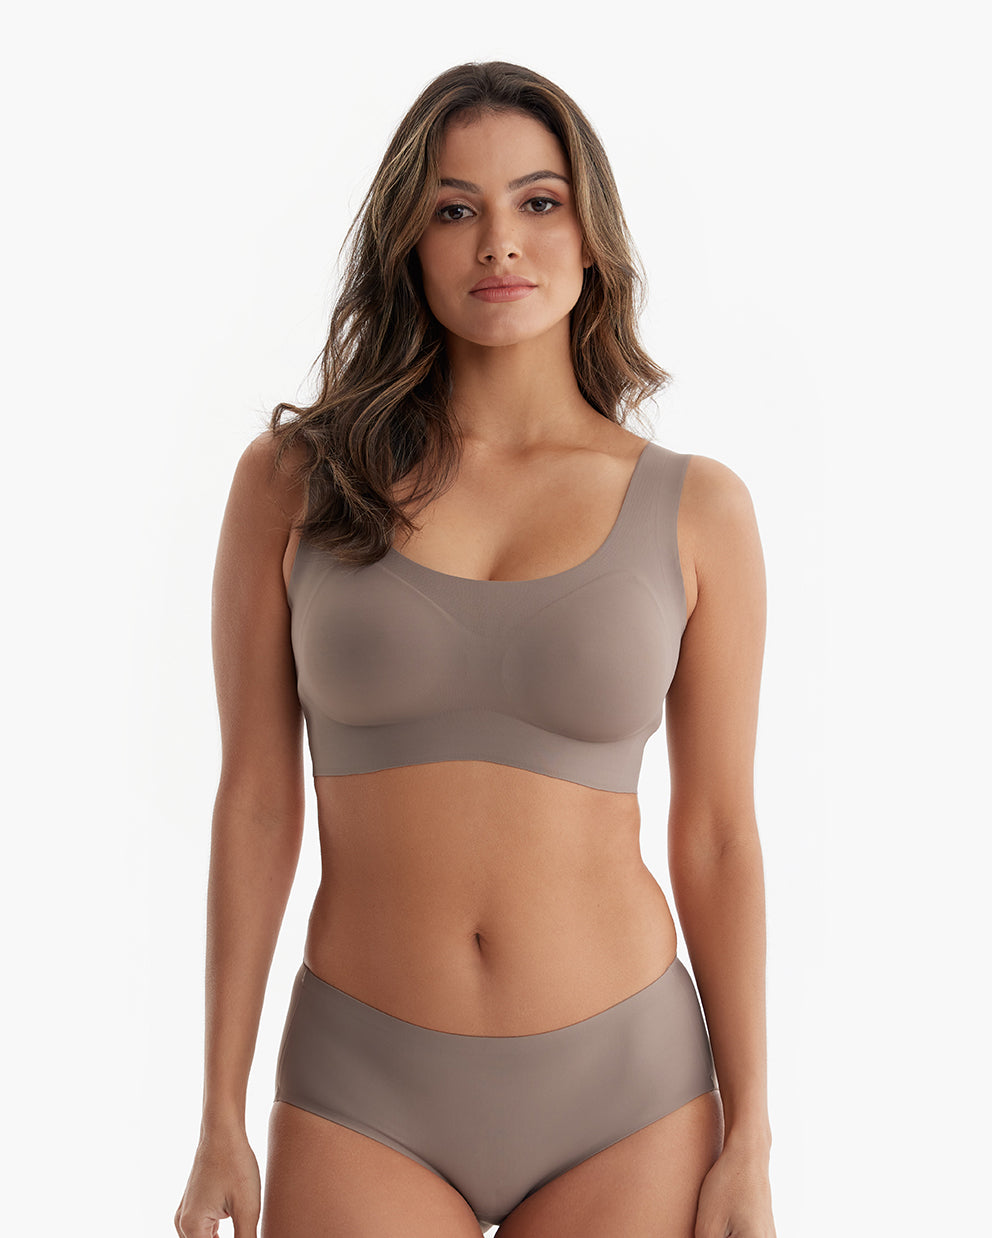 No Trace See Through Lingerie Women Panties MID Waist Seamless